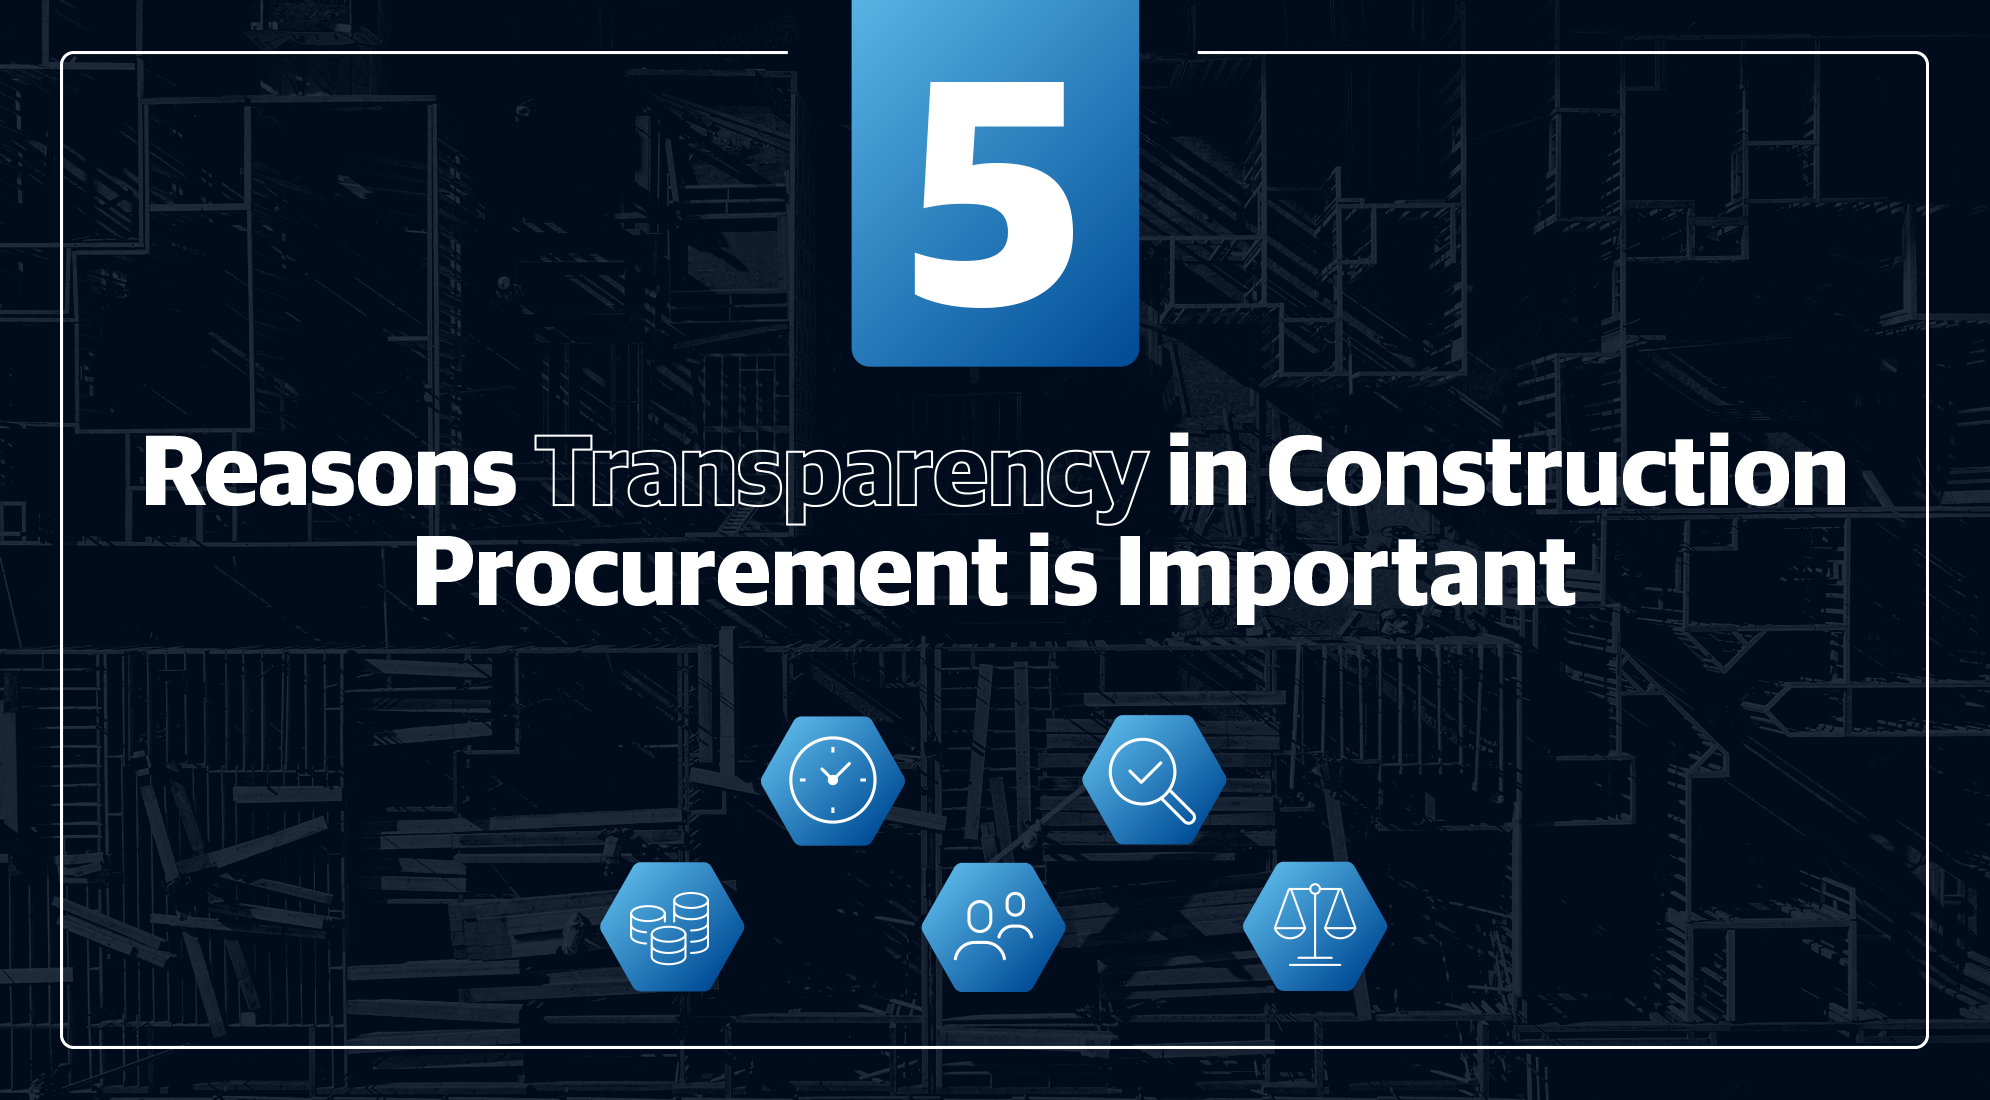 5 Reasons Transparency in Construction Procurement is Important